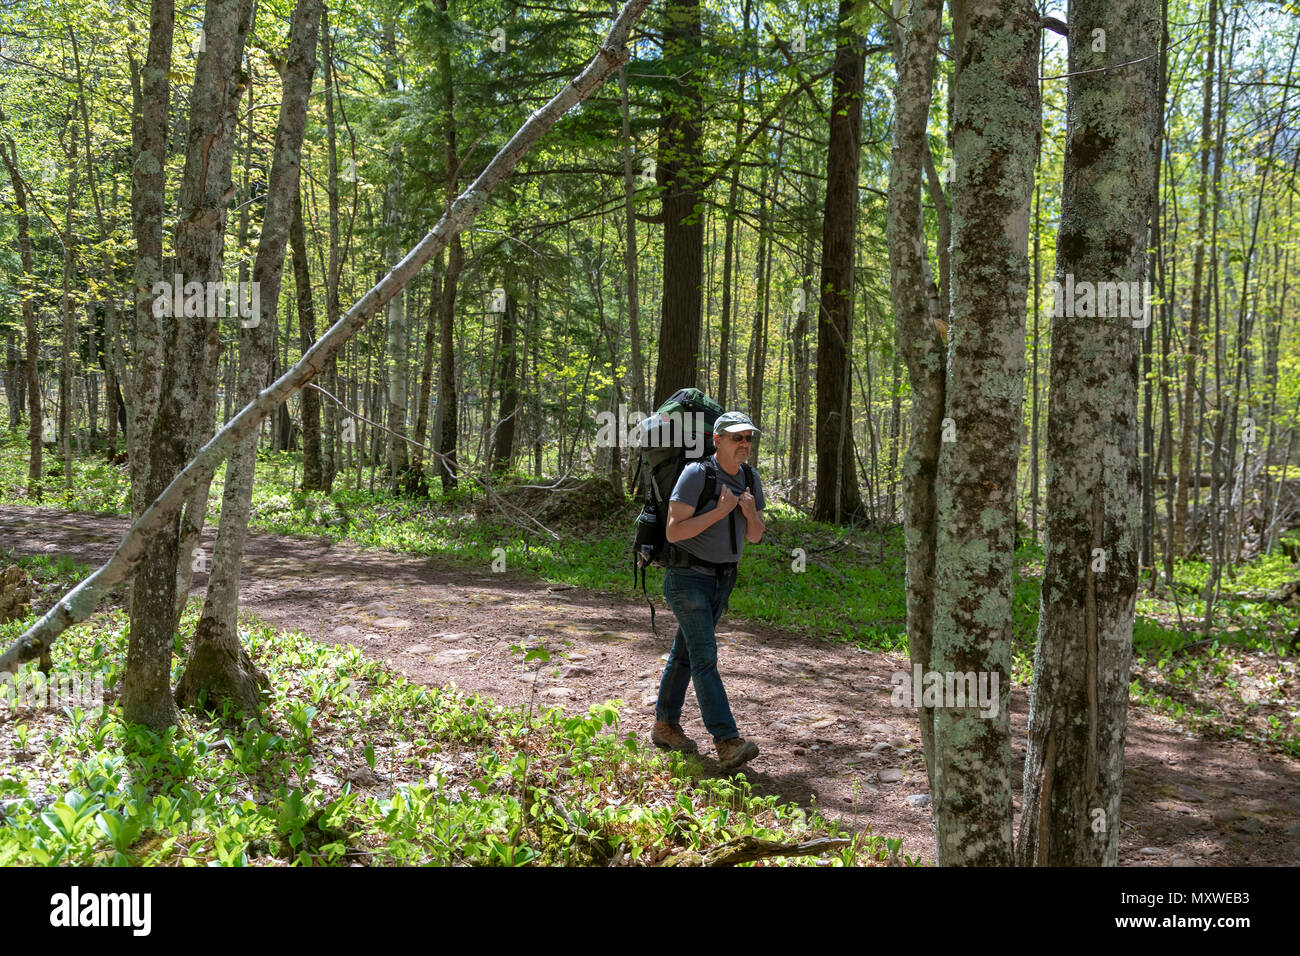 Ontonagon, Michigan - John West, 71, backpacks in Porcupine Mountains Wilderness State Park. Stock Photo